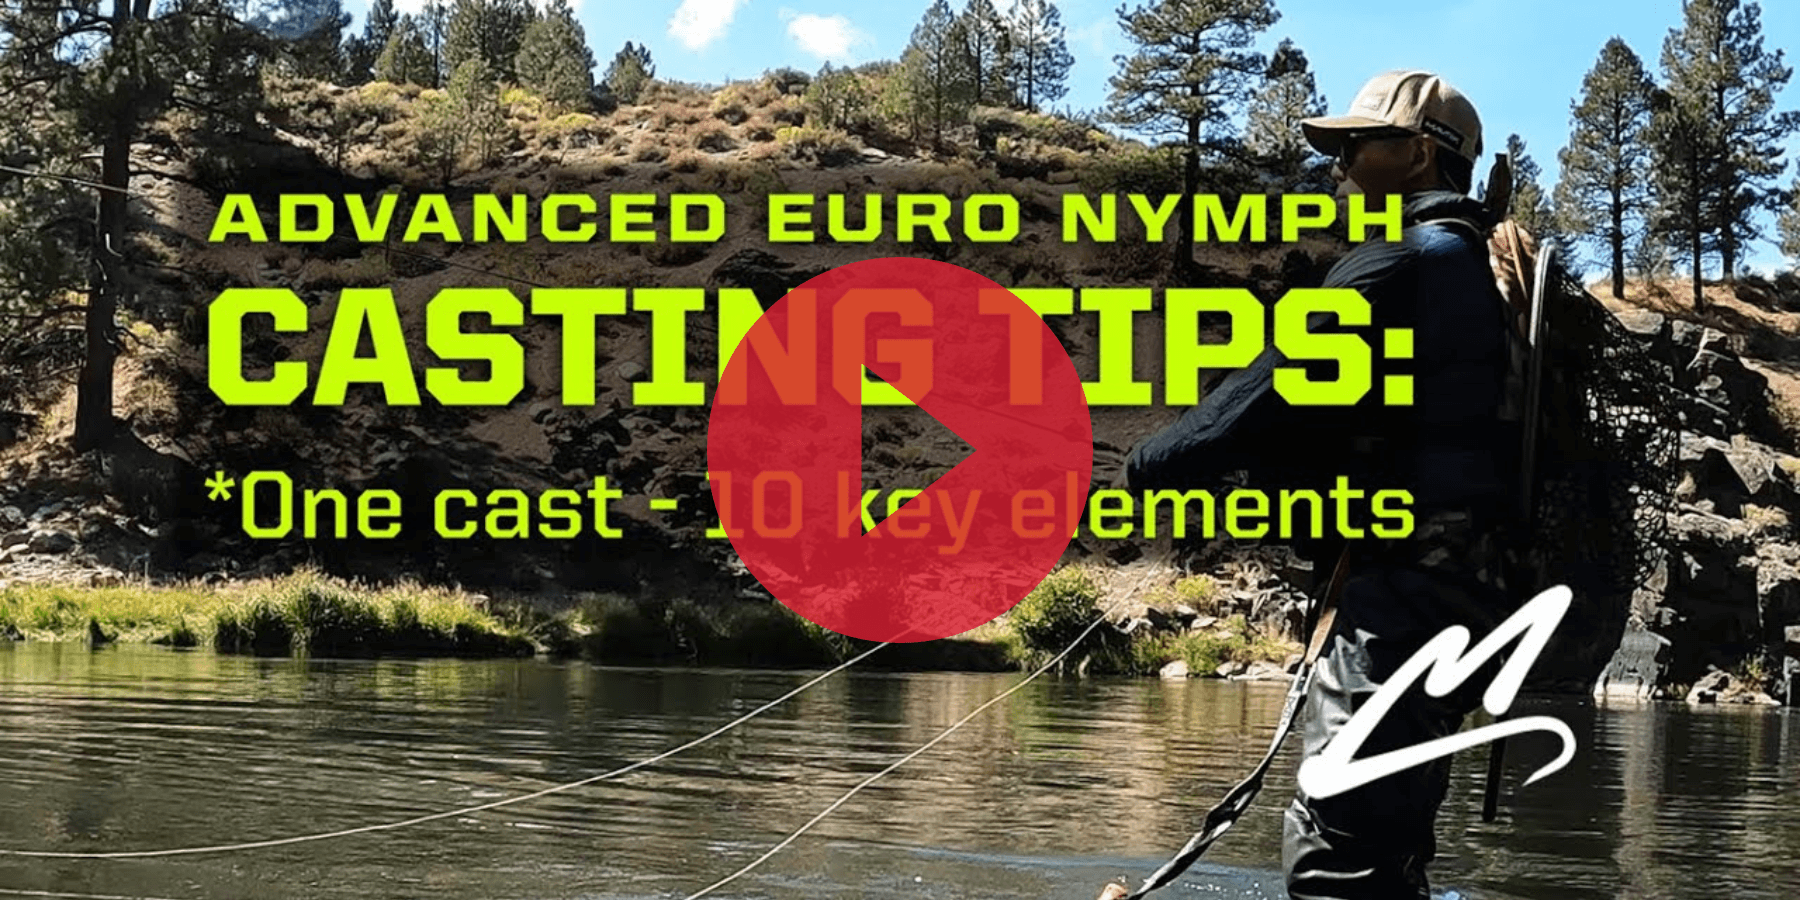 10 euro nymphing tips and tricks that’ll have you casting into runs that you thought were impossible to hit